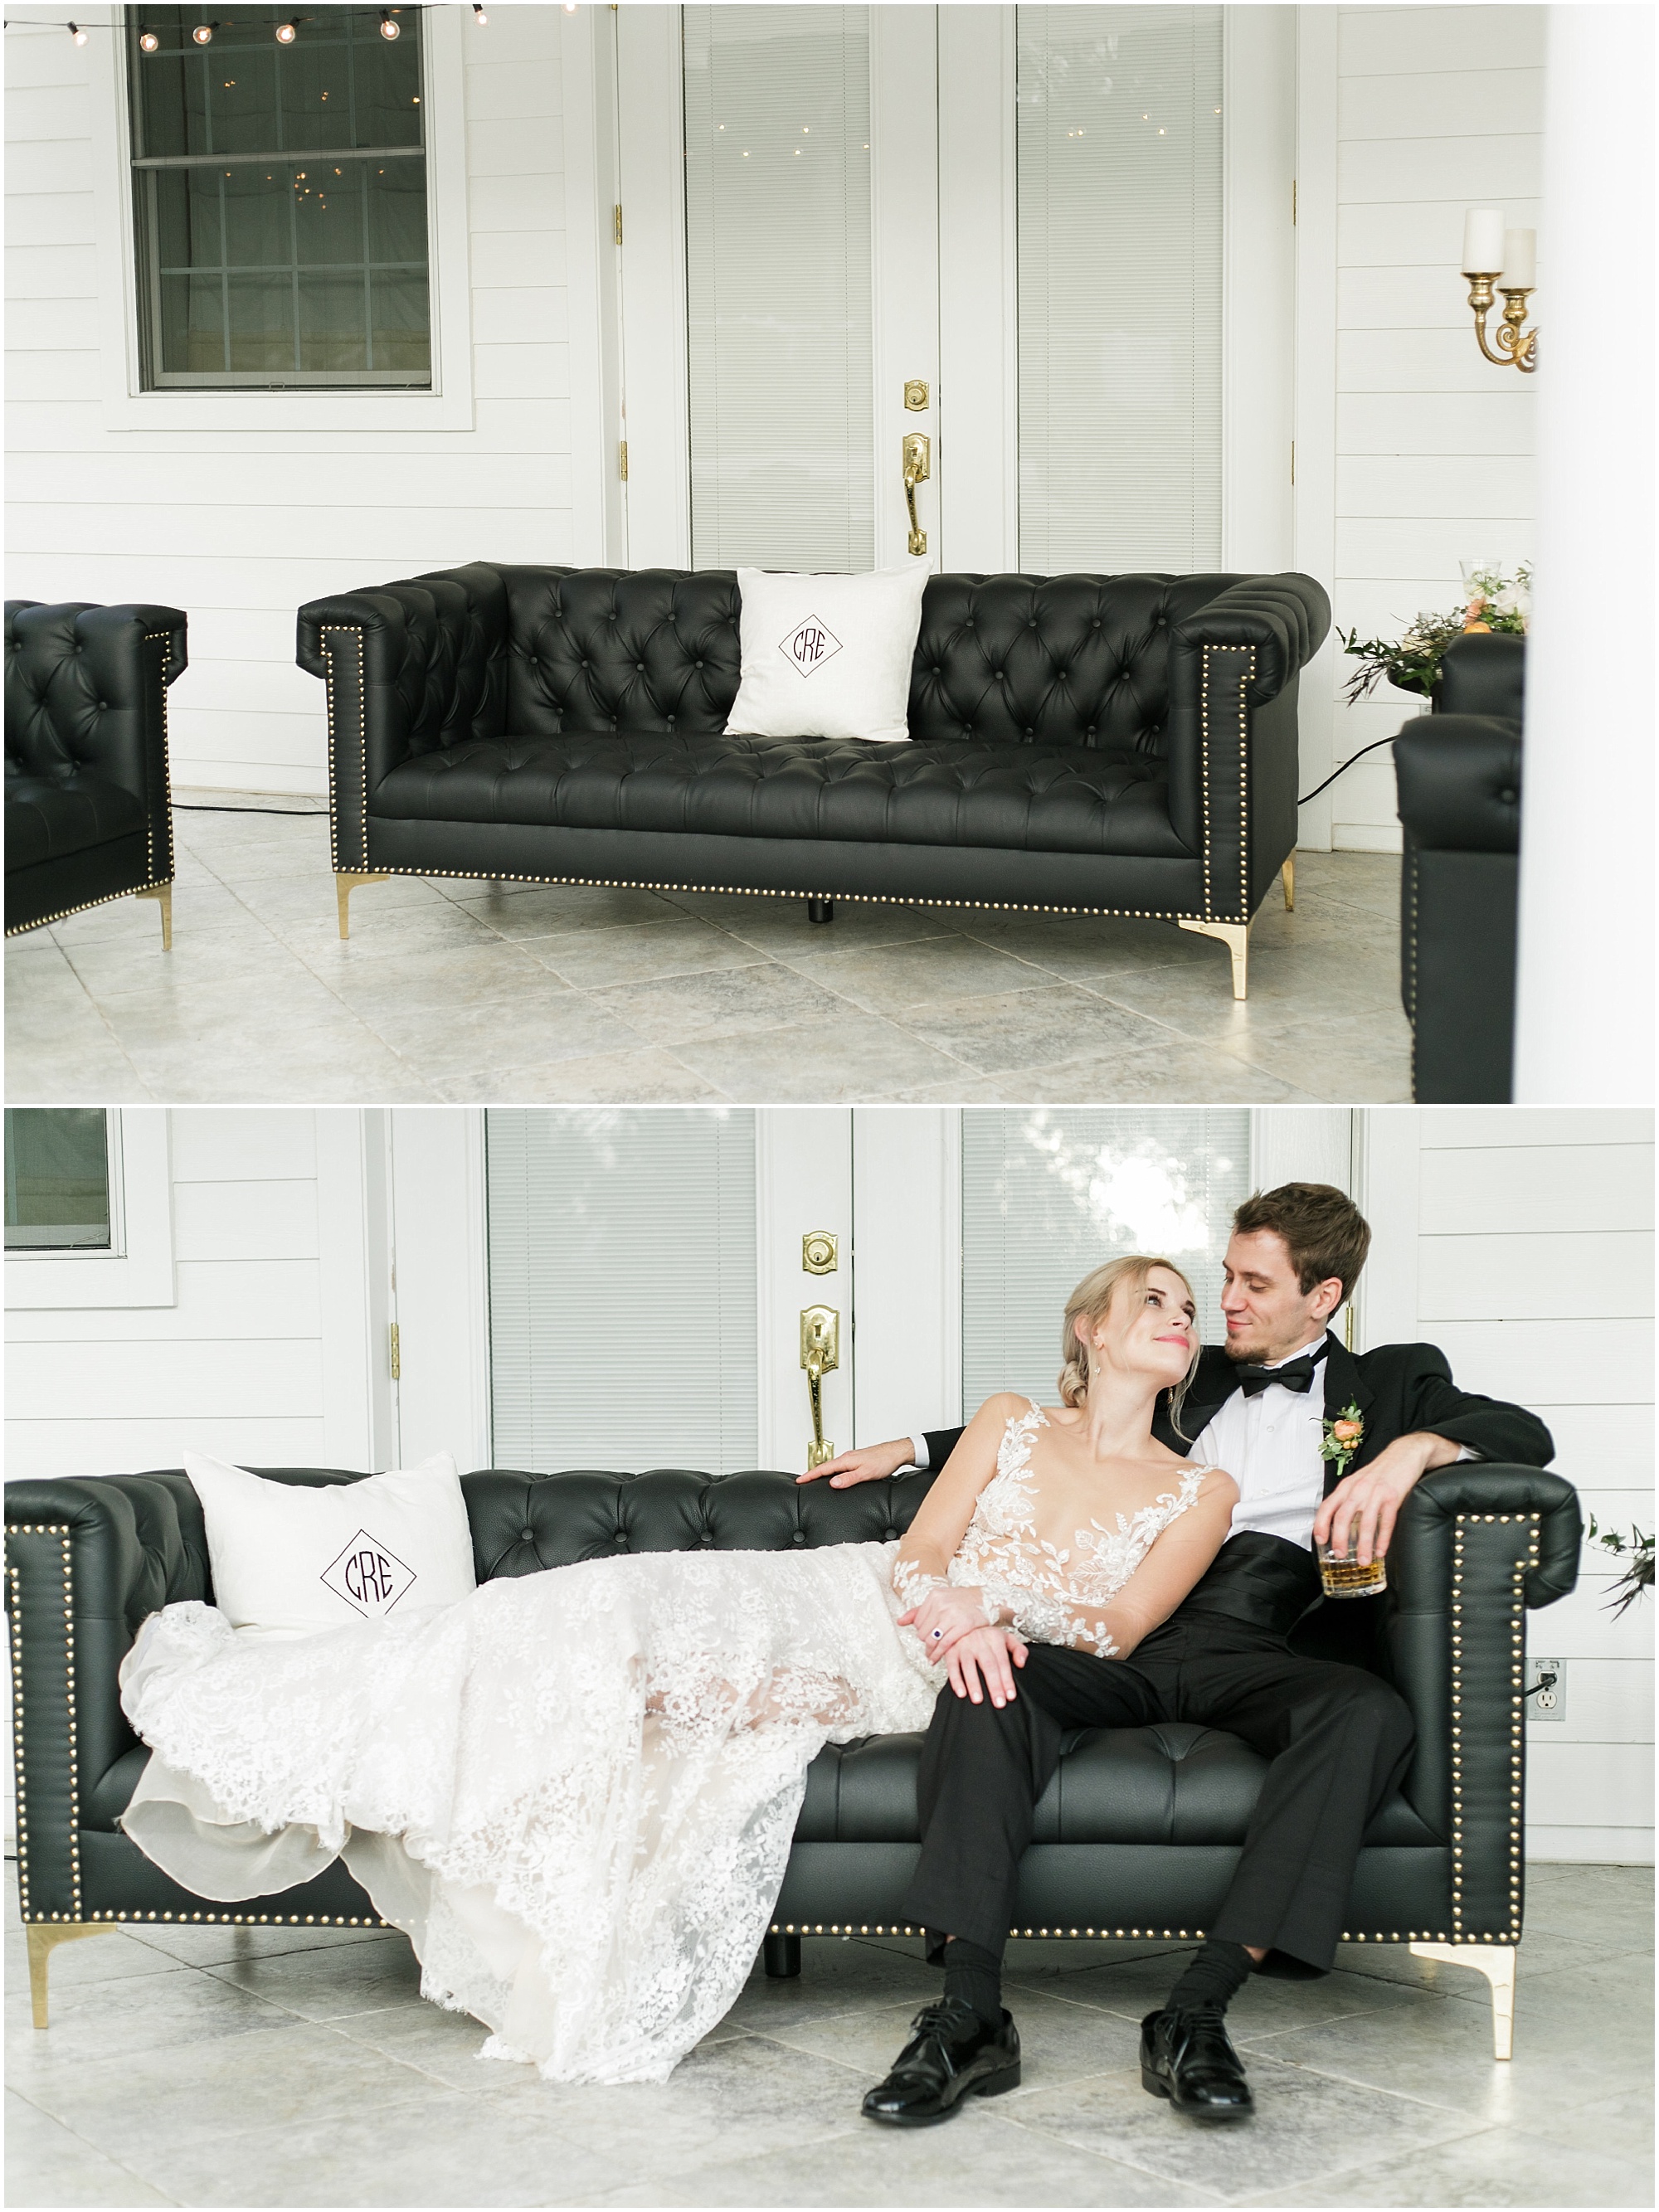 Bride and groom snuggling on a black leather couch on the terrace.